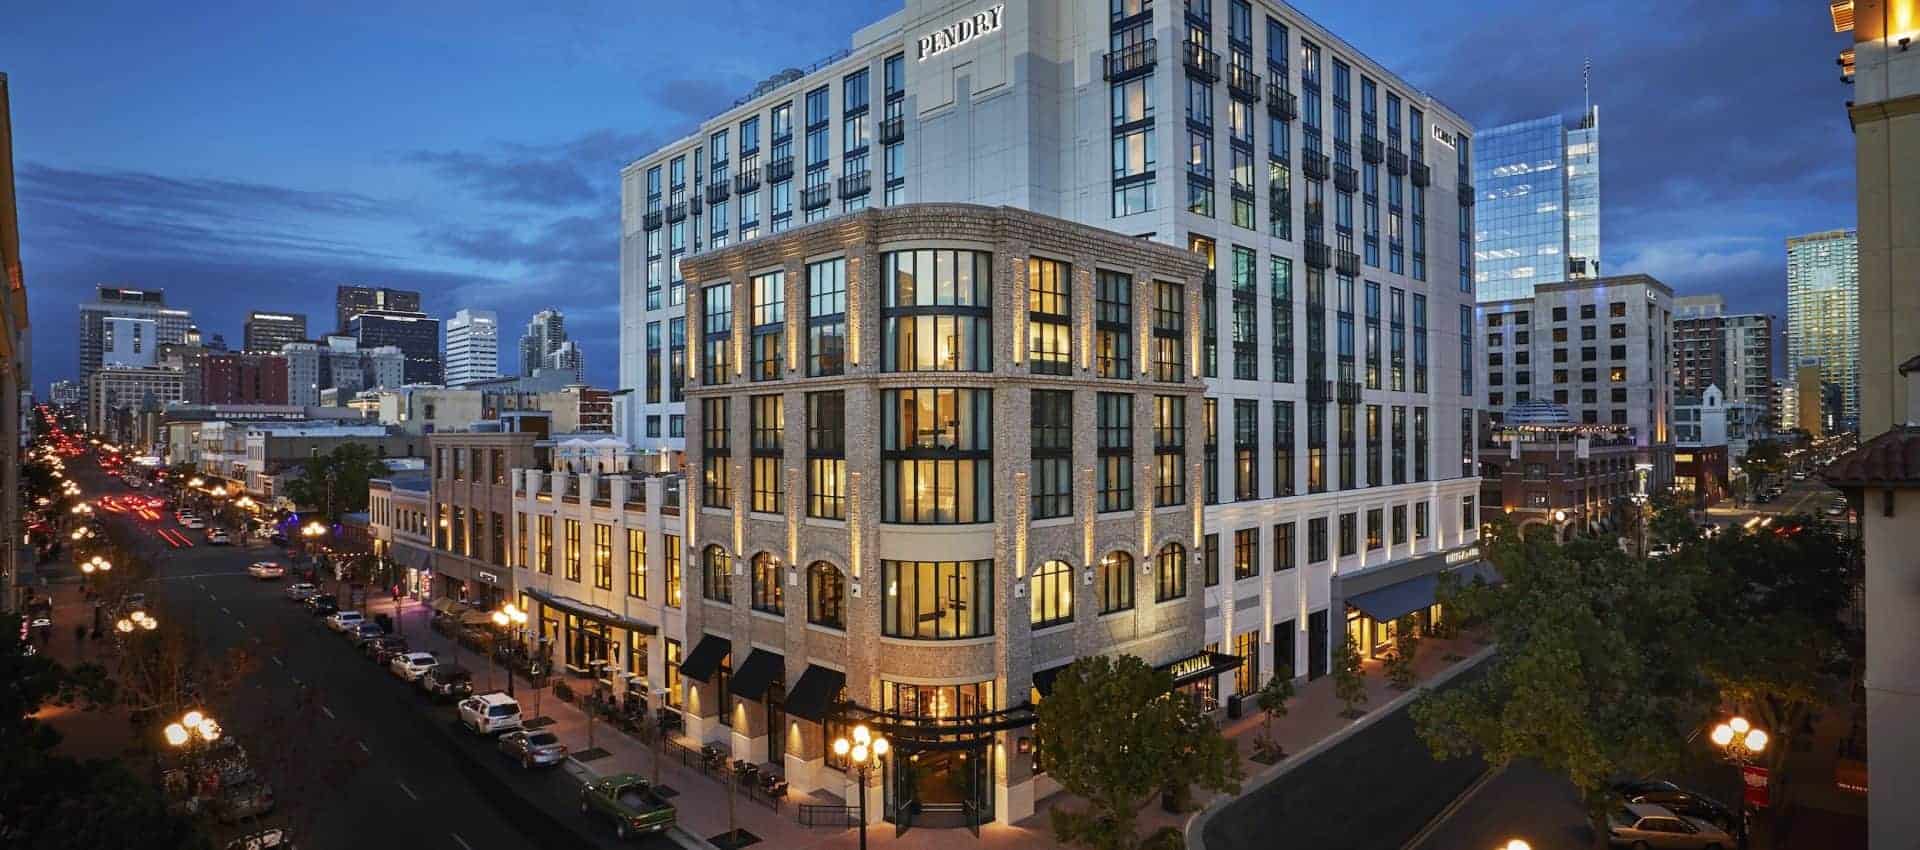 Pendry San Diego Review